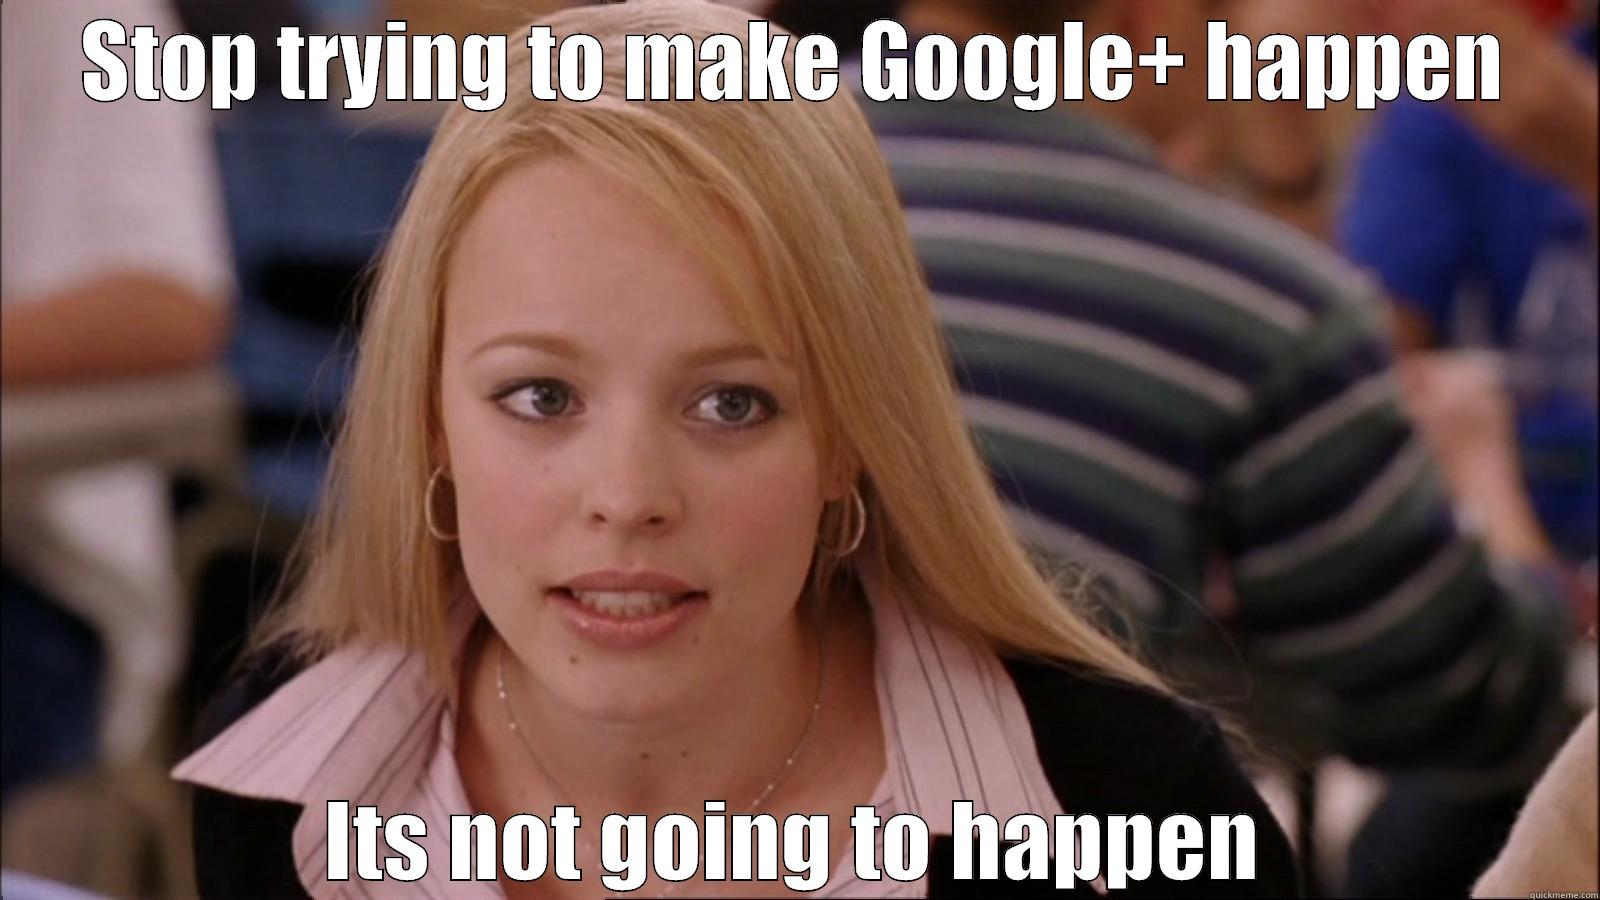 stop asd - STOP TRYING TO MAKE GOOGLE+ HAPPEN ITS NOT GOING TO HAPPEN Misc